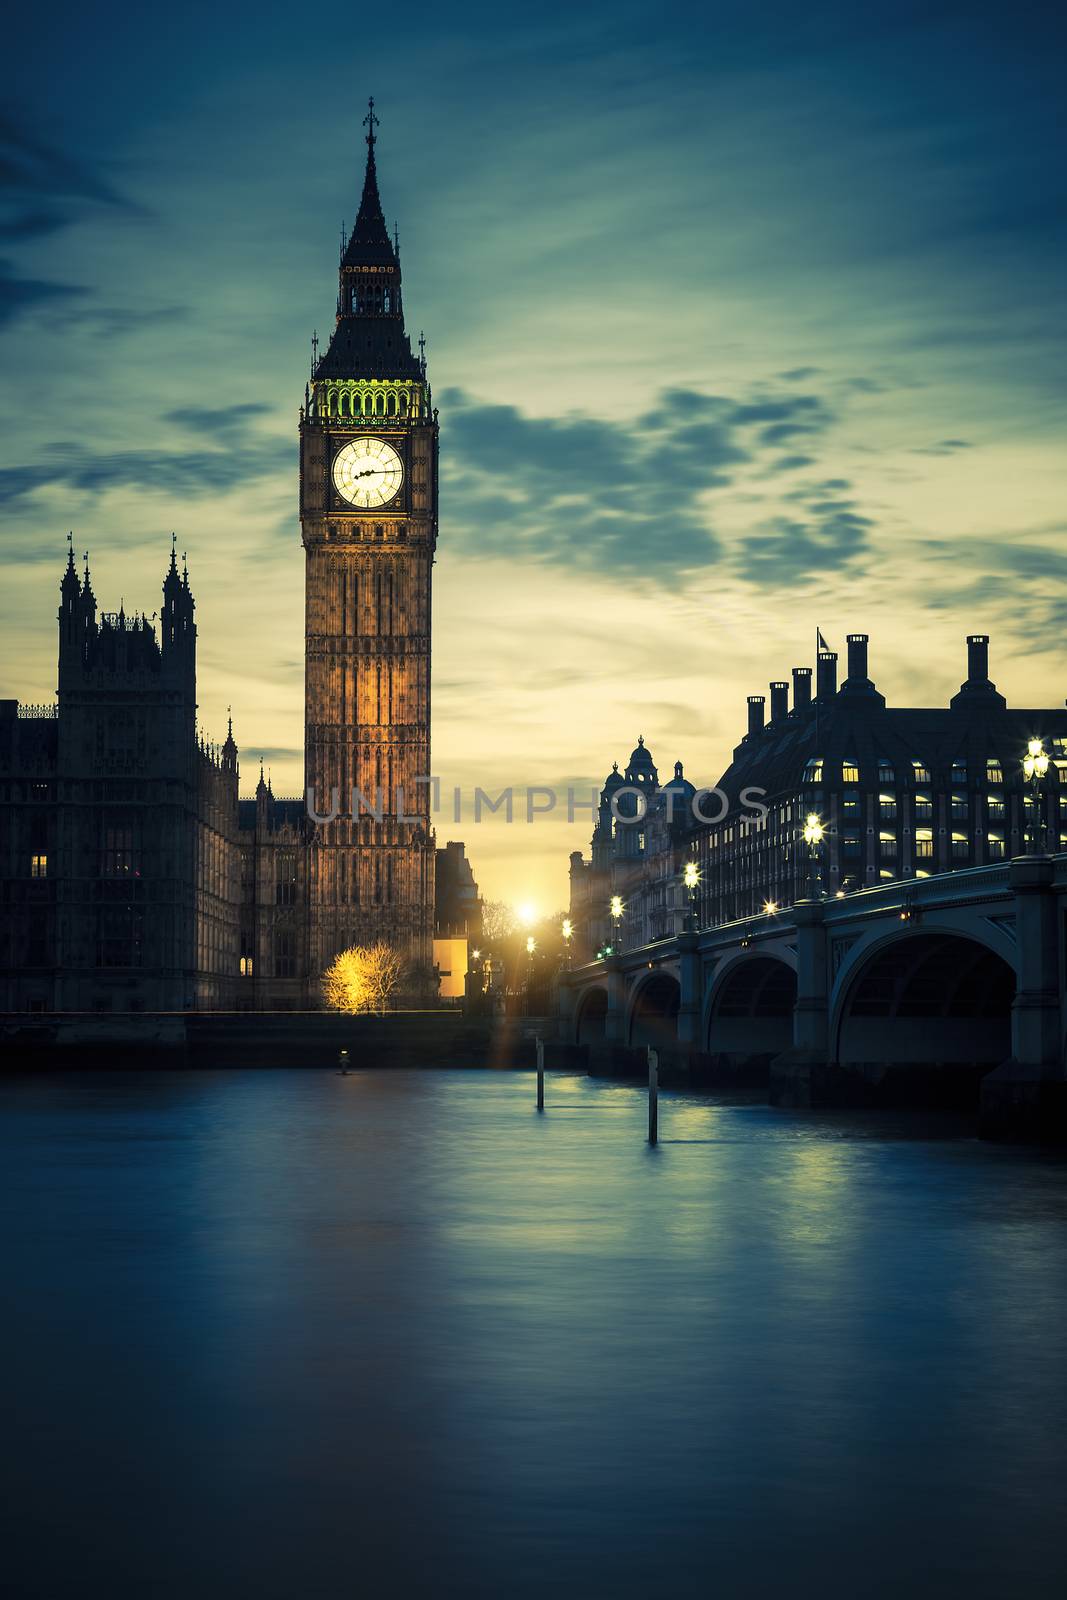 Famous Big Ben clock tower in London at sunset, special photographic processing.